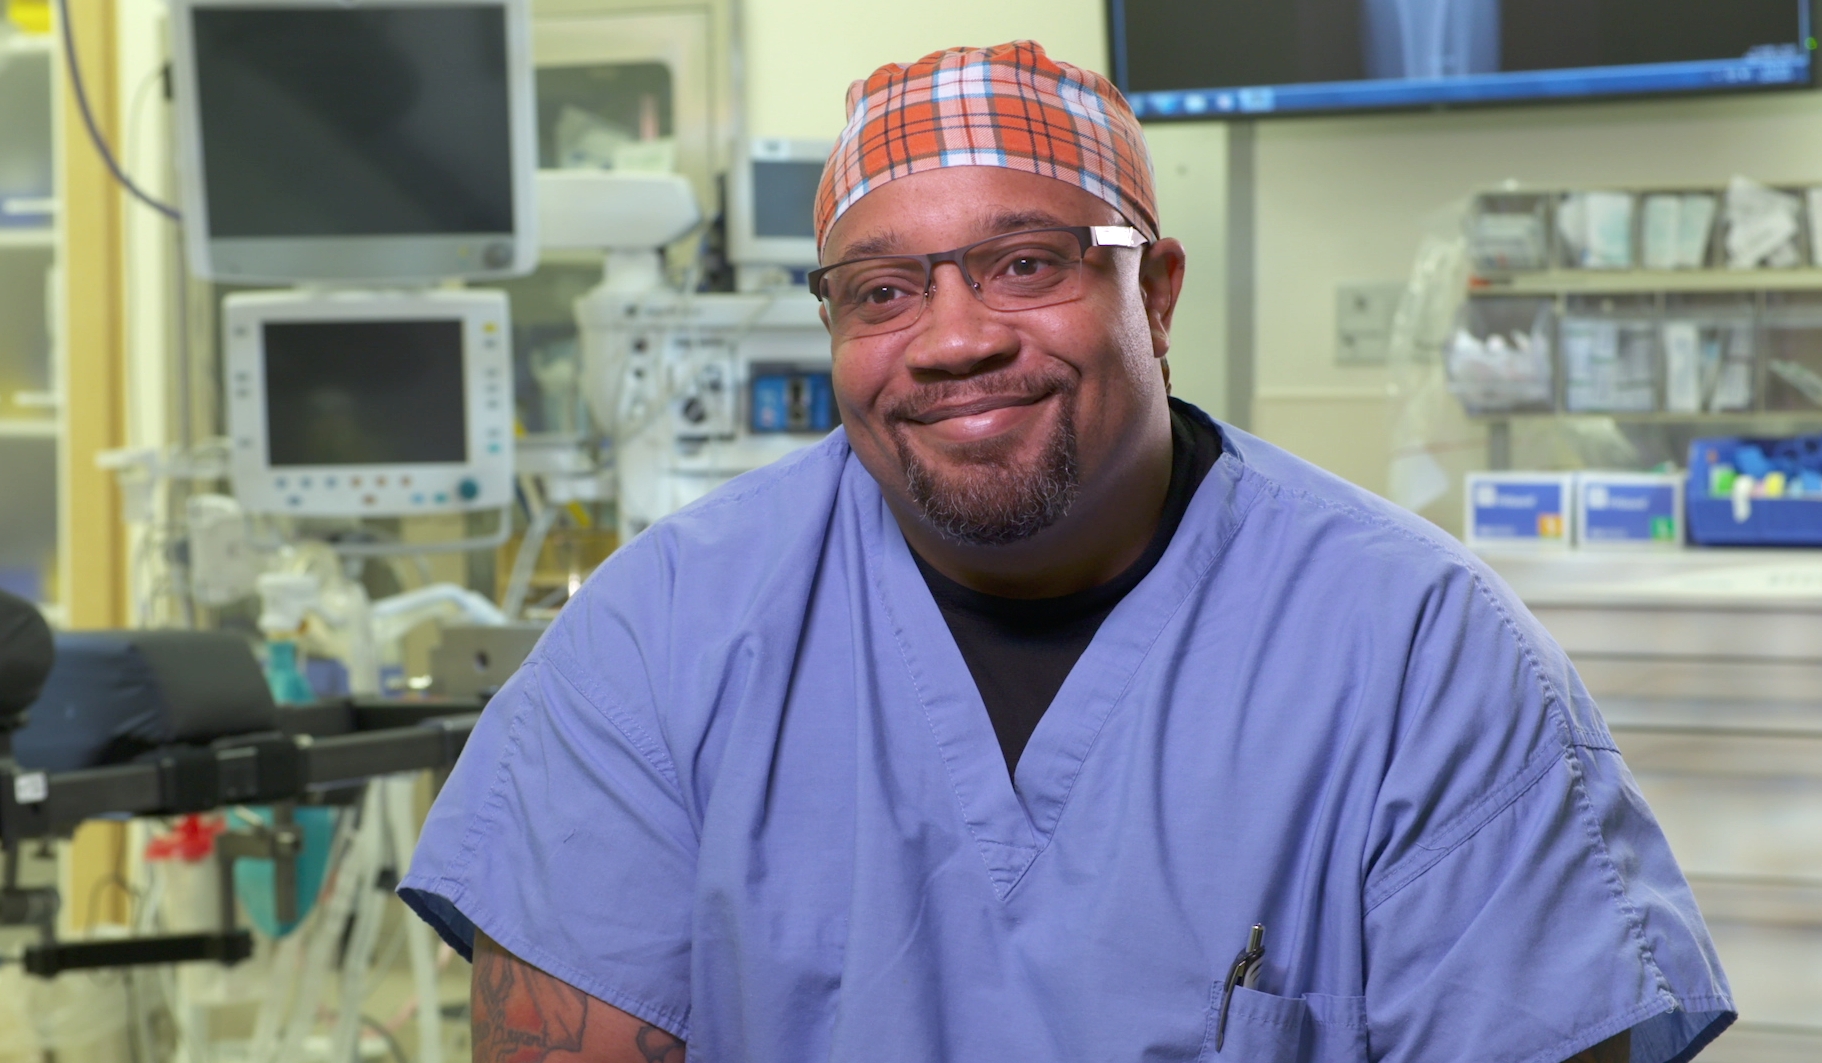 Darthvader Williamson, 39, is a surgical tech in Memphis. (Photo: Yahoo)